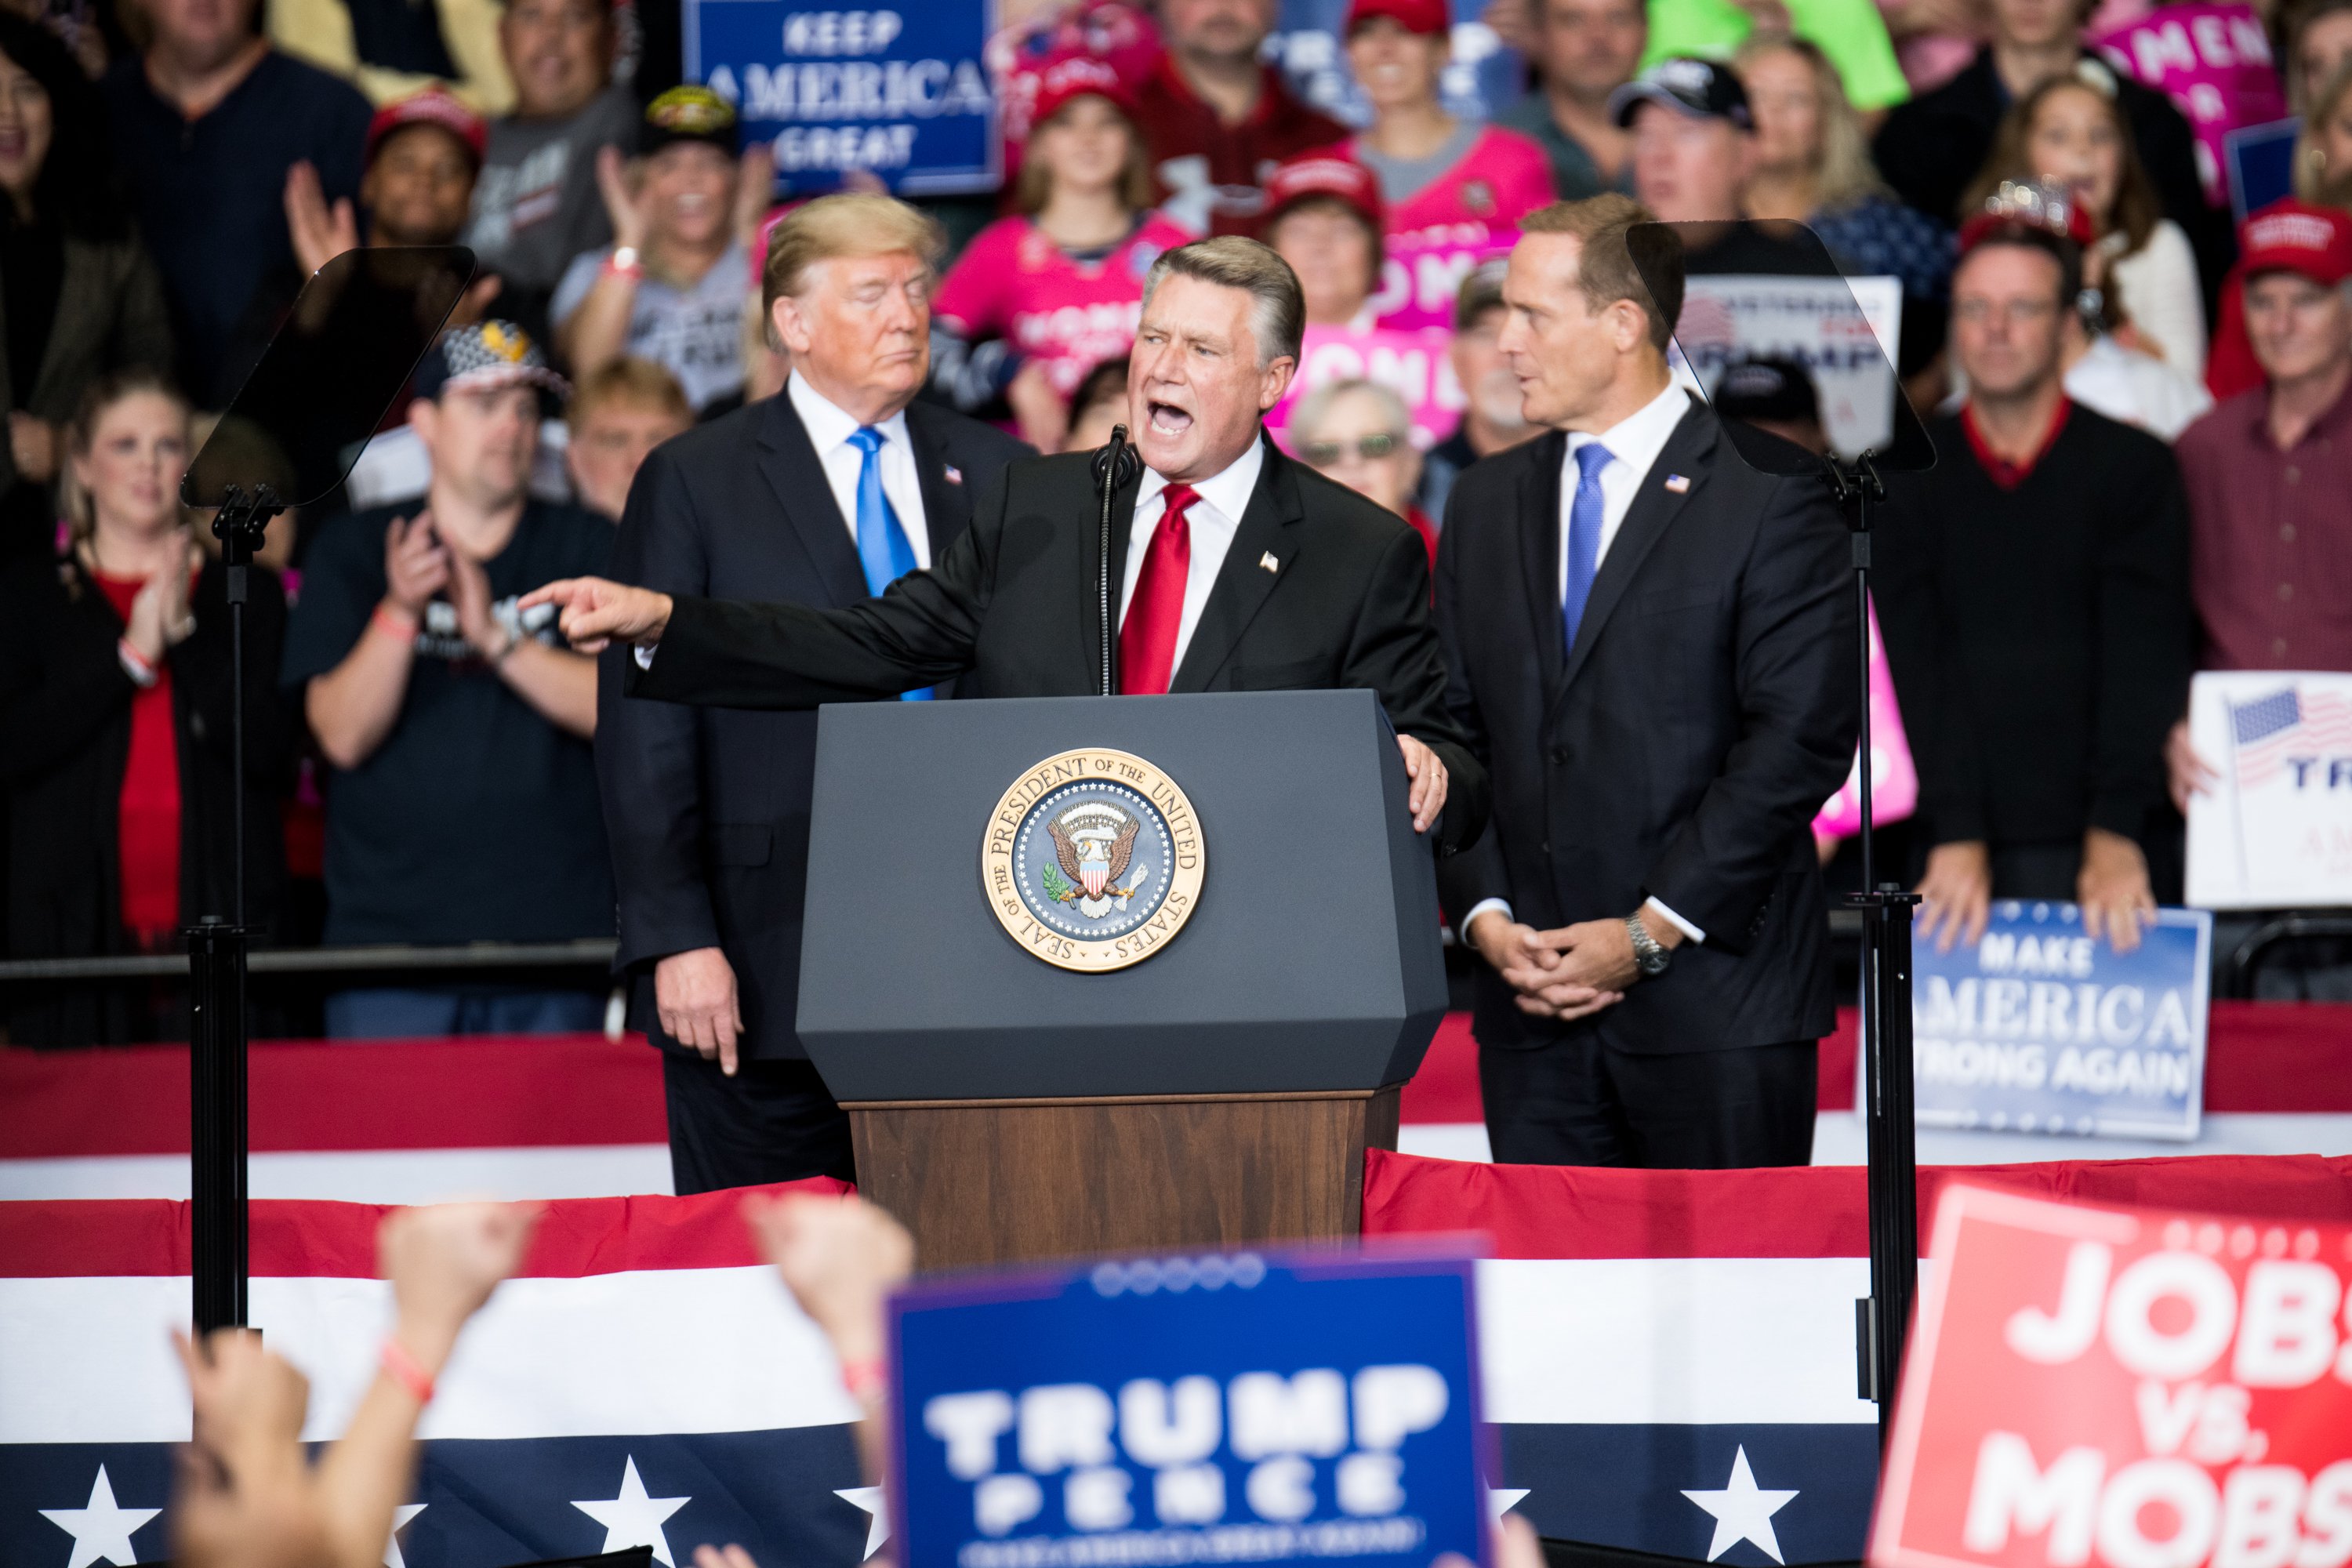 Republican Congressional candidate for North Carolina's 9th district Mark Harris (C), addresses the crowd as President Donald Trump (L) and Republican Congressional candidate for North Carolina's 13th district Ted Budd (R), listen at the Bojangles Coliseum on October 26, 2018 in Charlotte, North Carolina. (Photo by Sean Rayford/Getty Images)